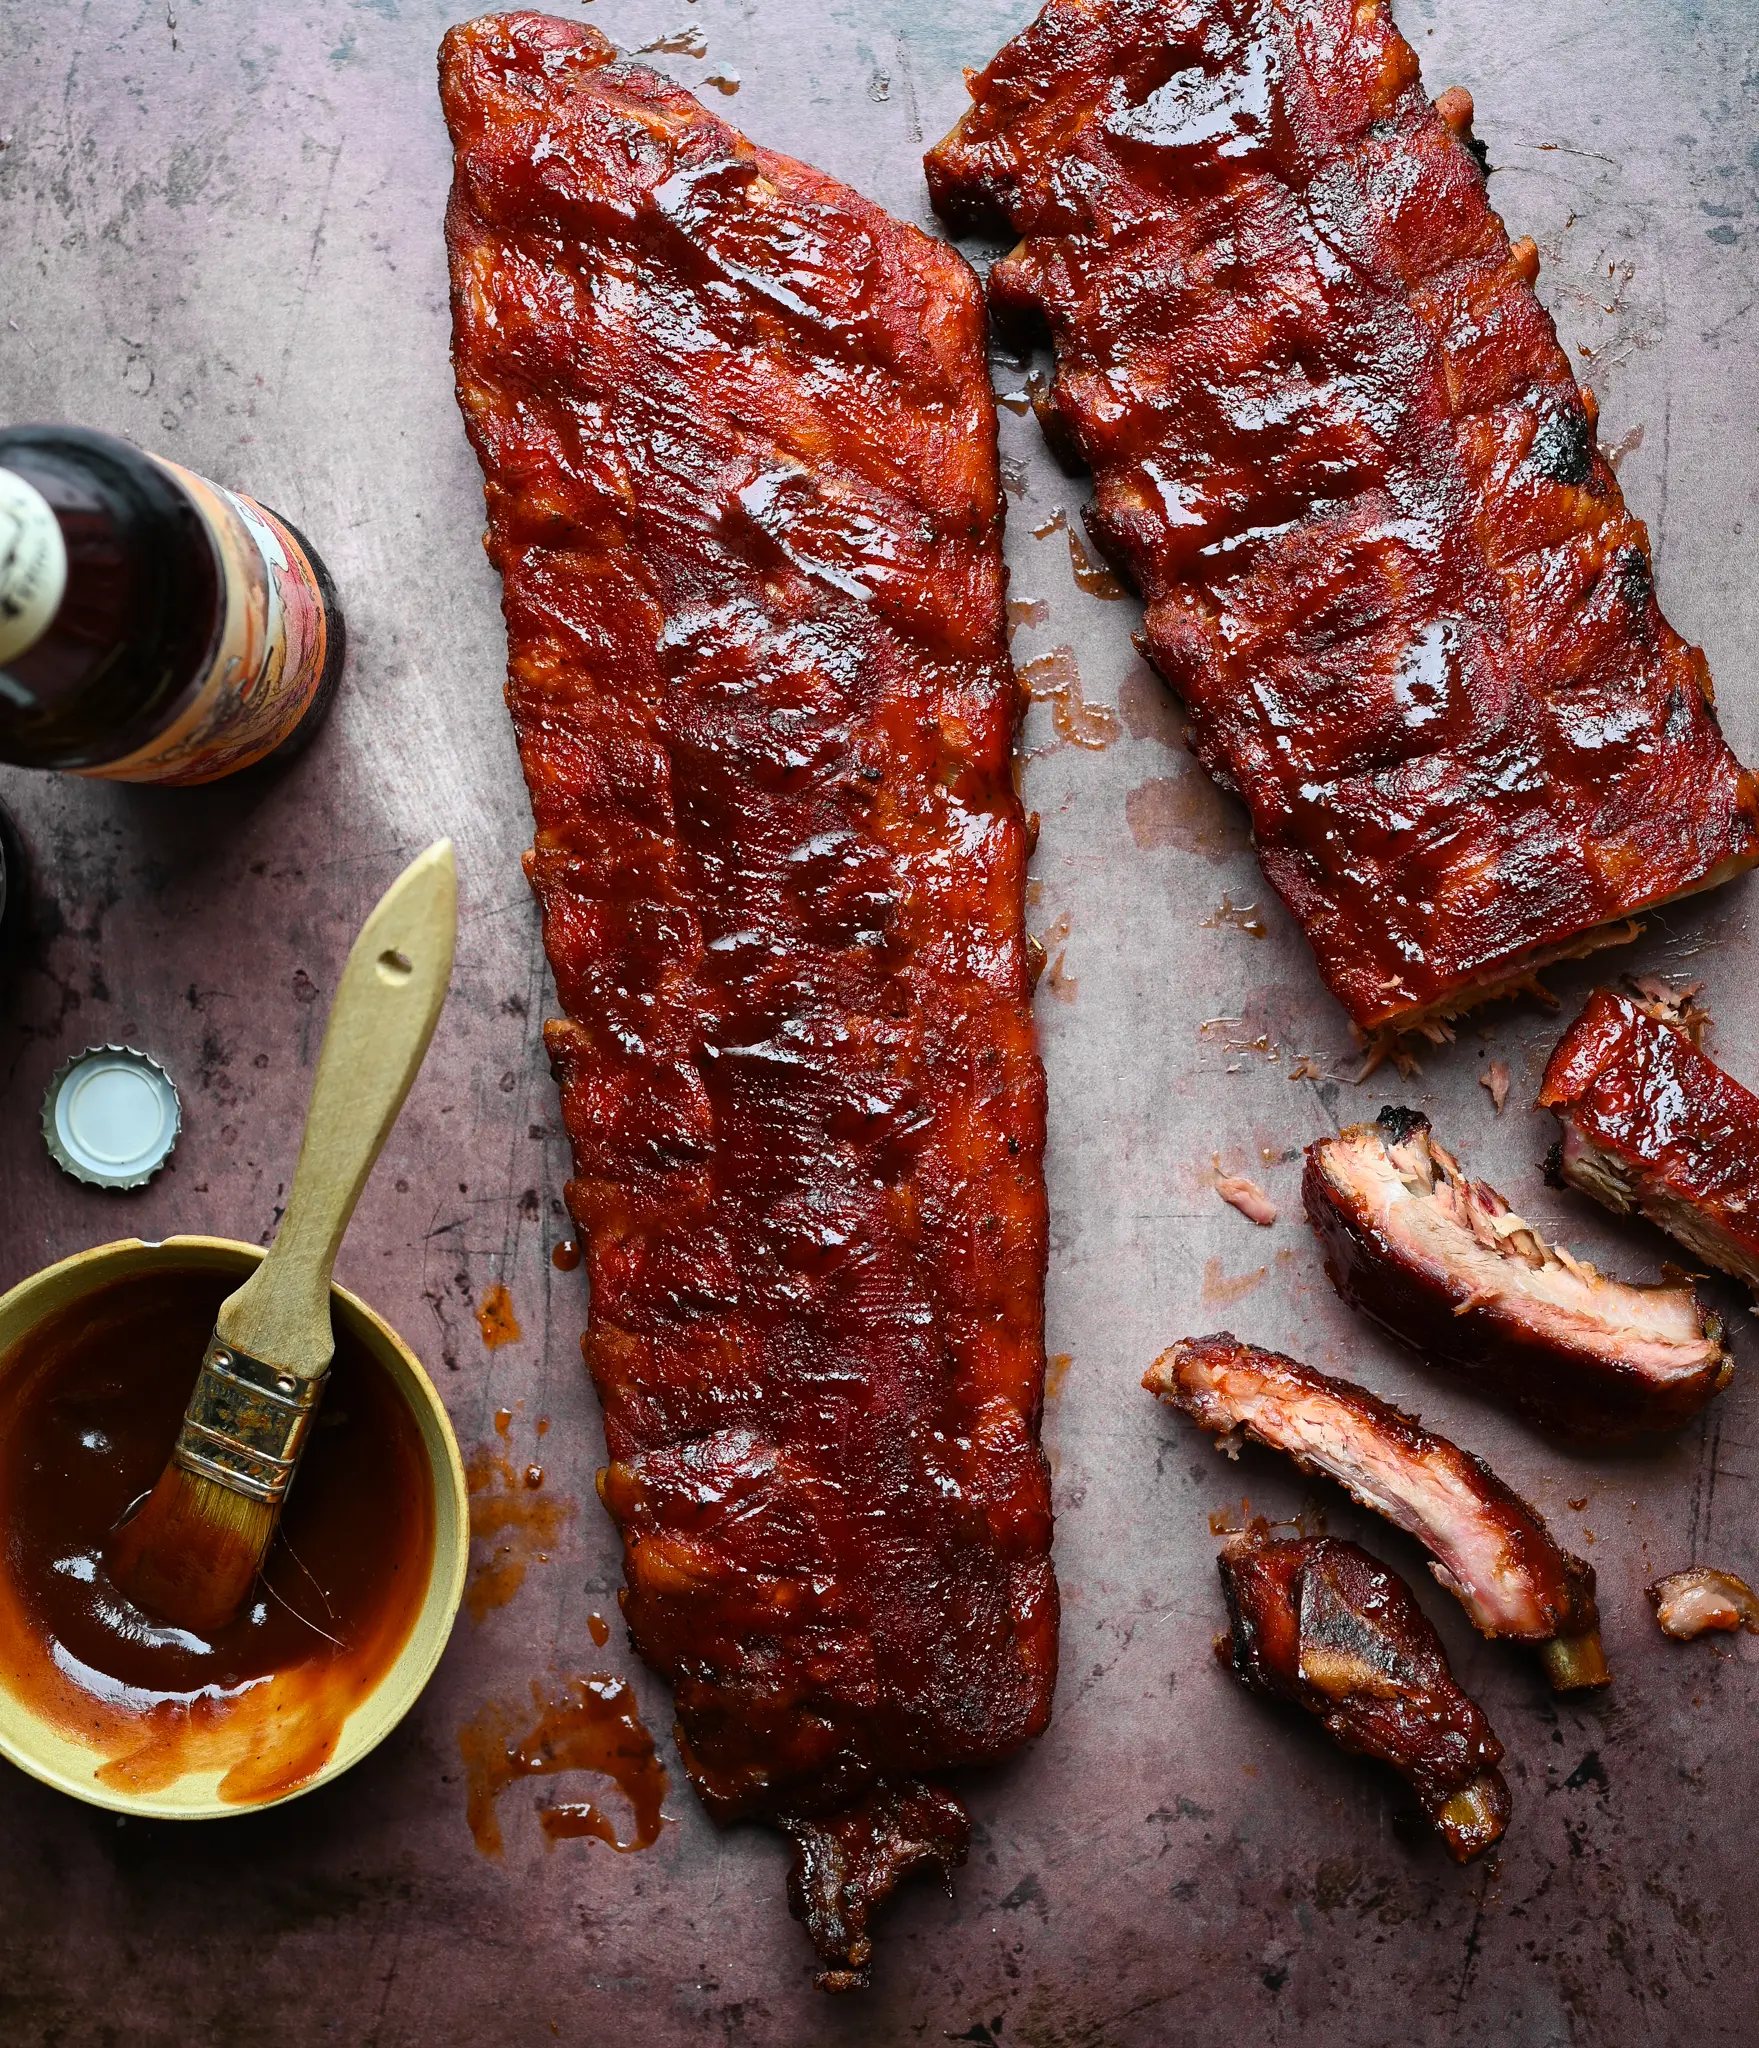 smoked ribs sauce - What can I put on ribs instead of BBQ sauce